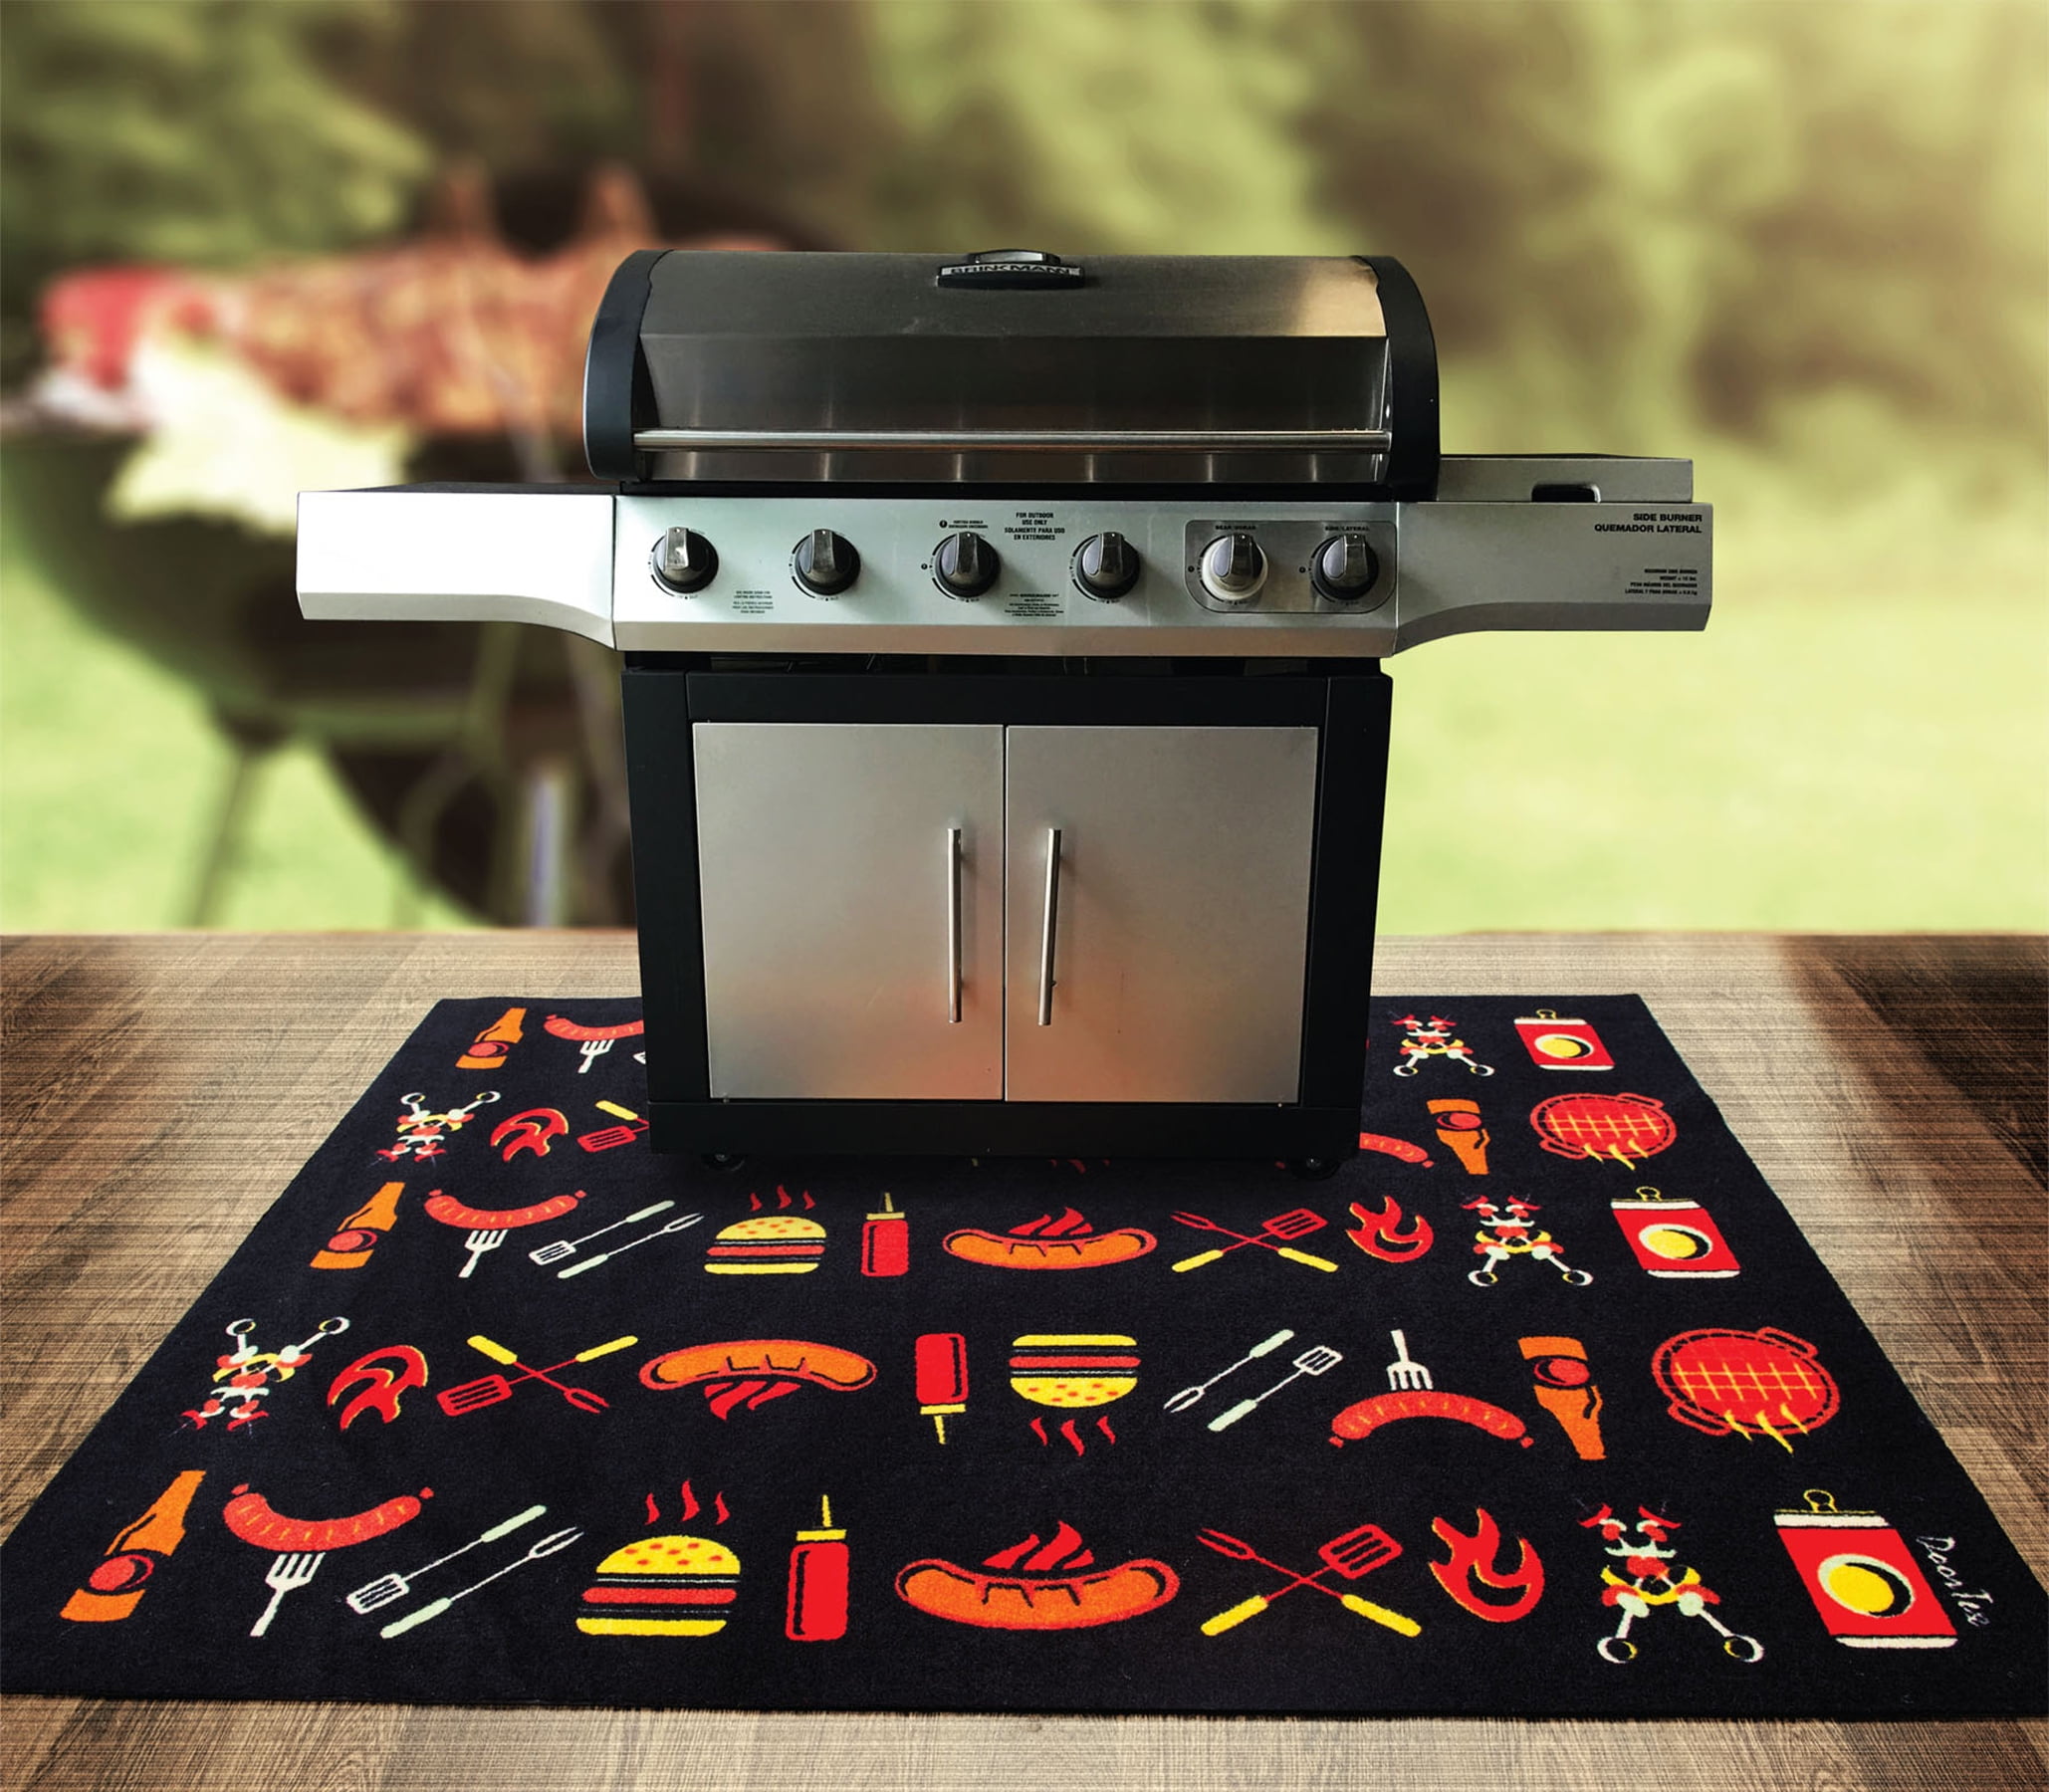 36 x 60 Sahamoduo Under The Grill Mat, Use This Absorbent Grill Pad Floor Mat to Protect Decks Patios from Grease Splatter and Other Messes ，BBQ Grilling Gear Gas Electric Grill